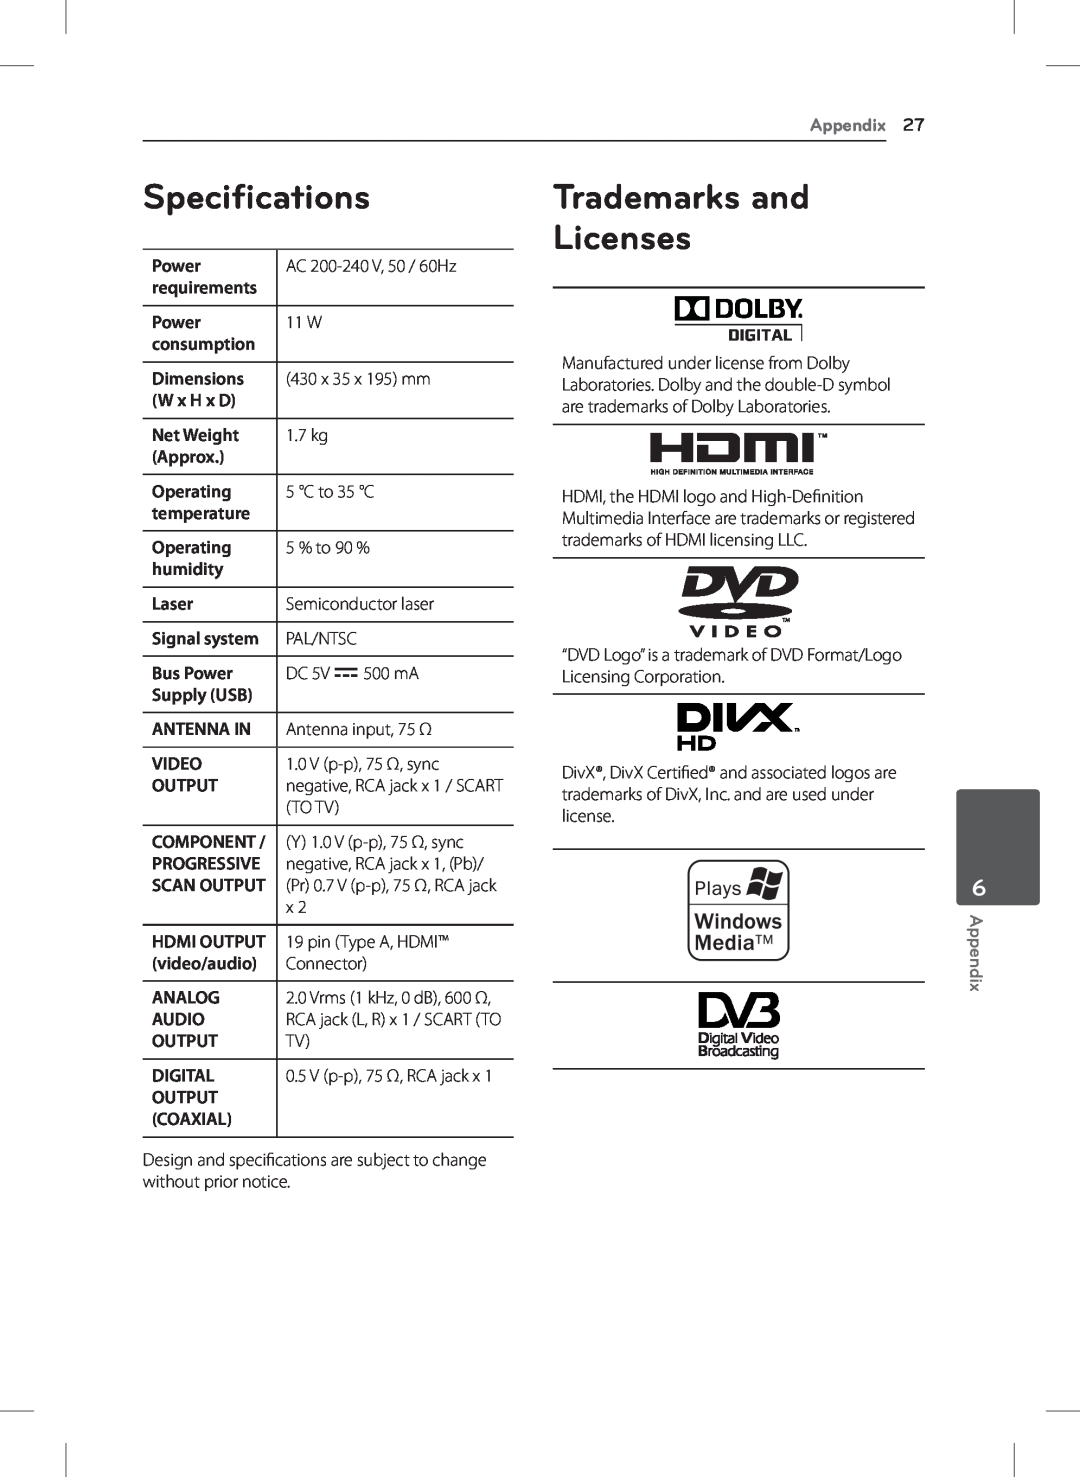 LG Electronics DVT699H owner manual Specifications, Trademarks and Licenses, Appendix 